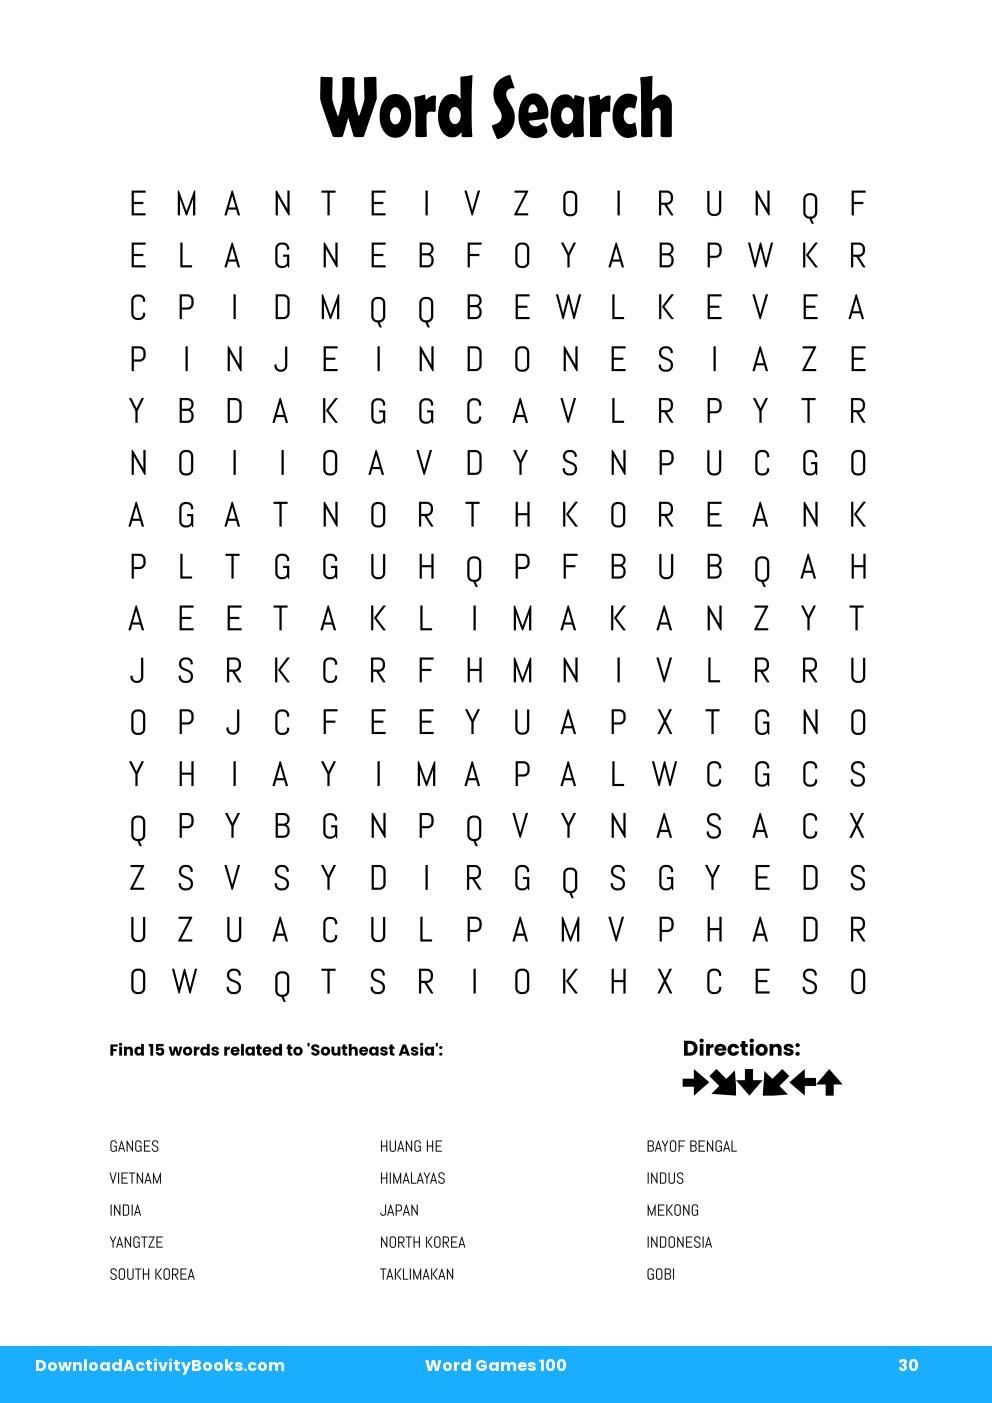 Word Search in Word Games 100